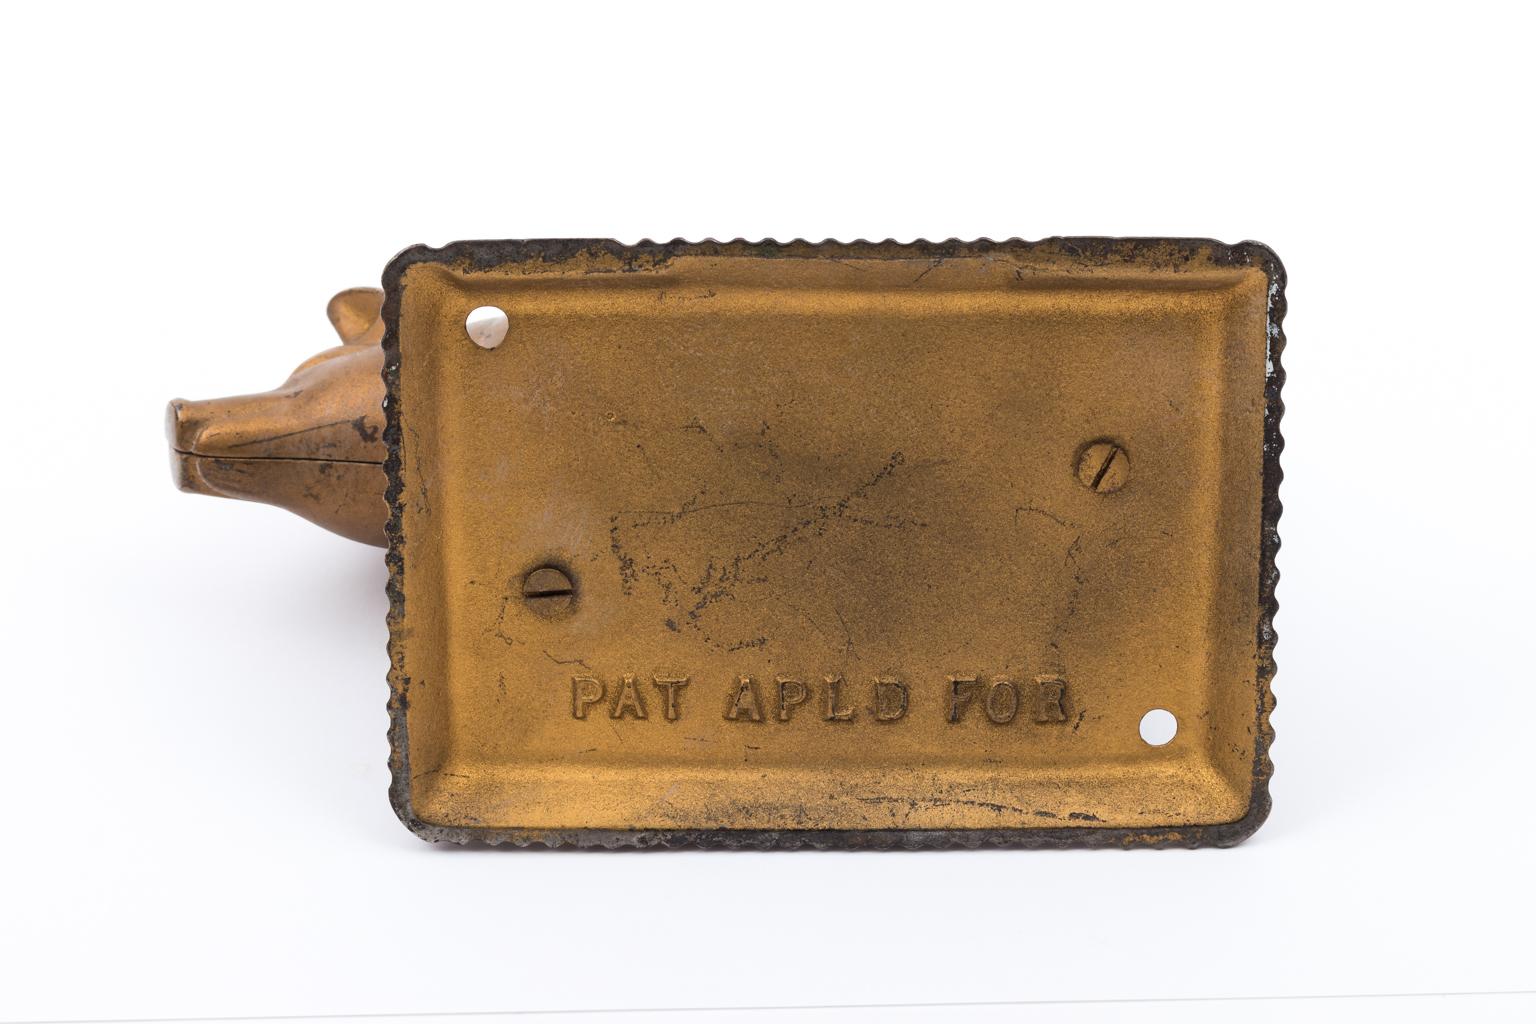 Counter top cigar cutter in the shape of a cast iron pig, possible made to advertise Morey's Fat Hog Cigars. The cigar would go into the butt while the tail is used to trim the cigar. Please note of wear with age to the finish. Most of the tail is